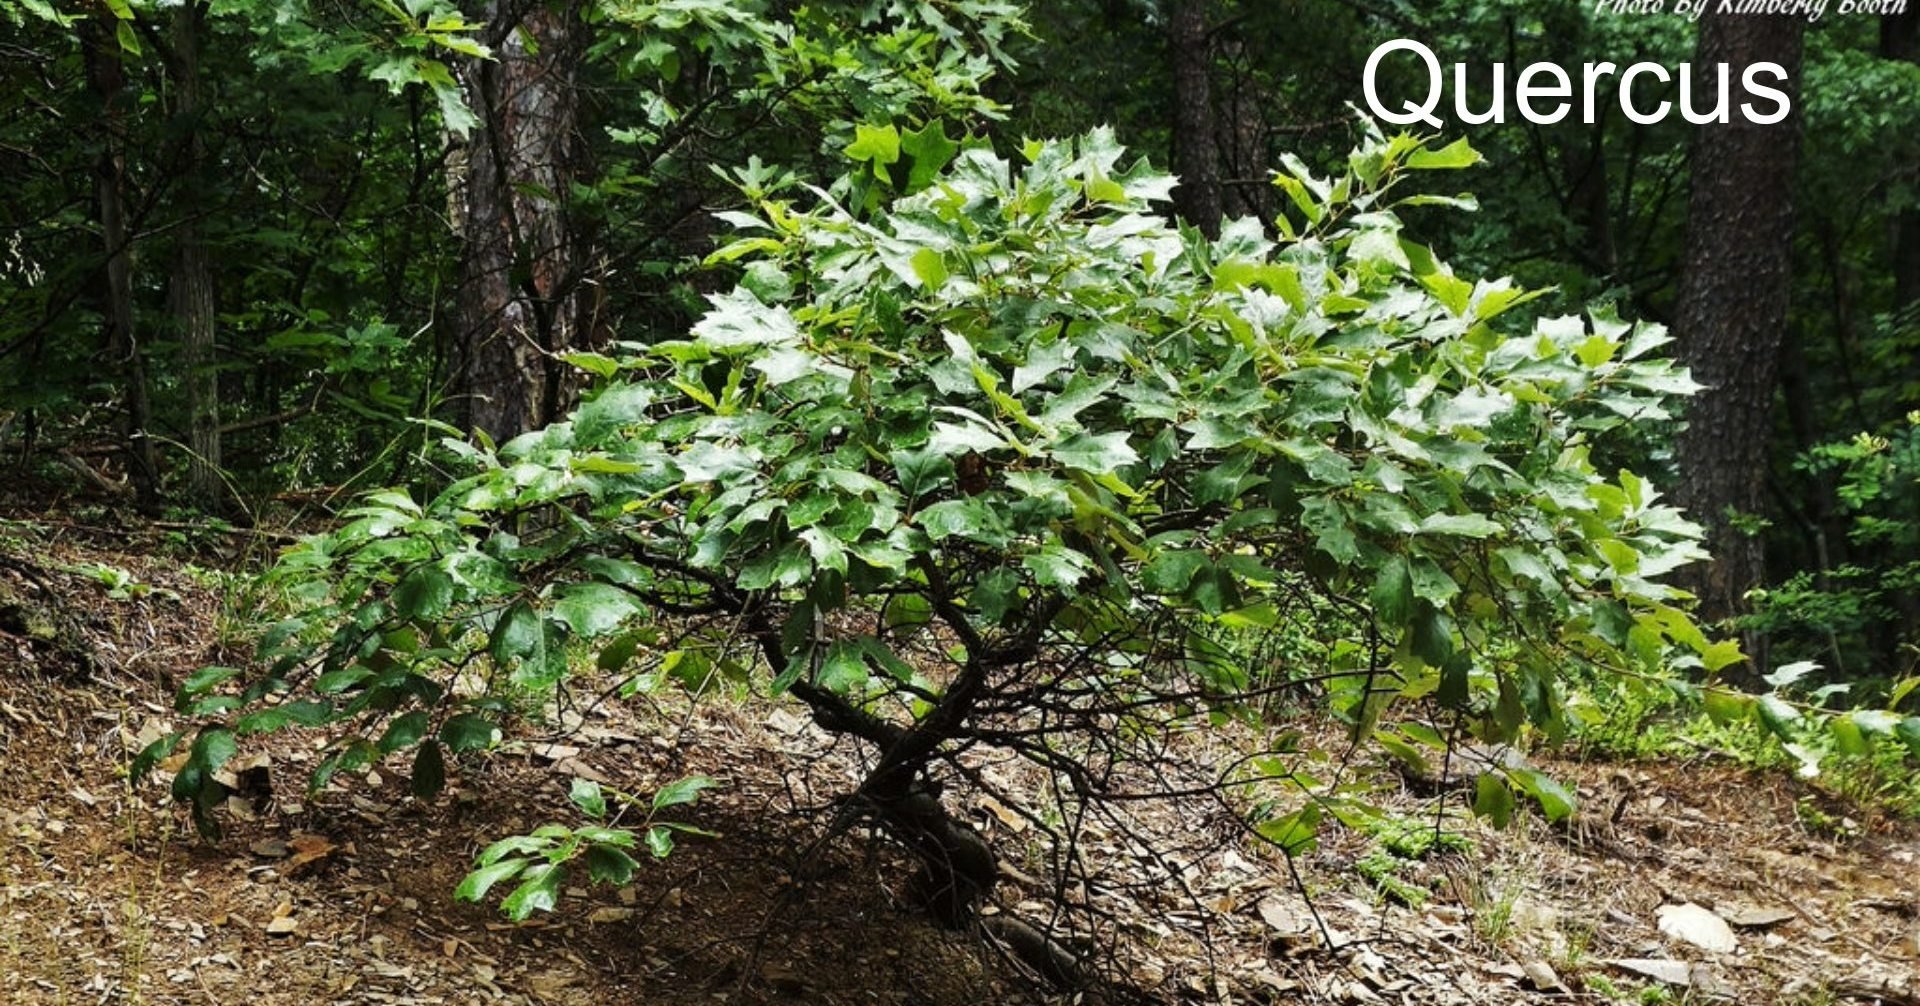 Can you identify the keystone of keystone trees? Hint: Yes, it comes in small sizes.